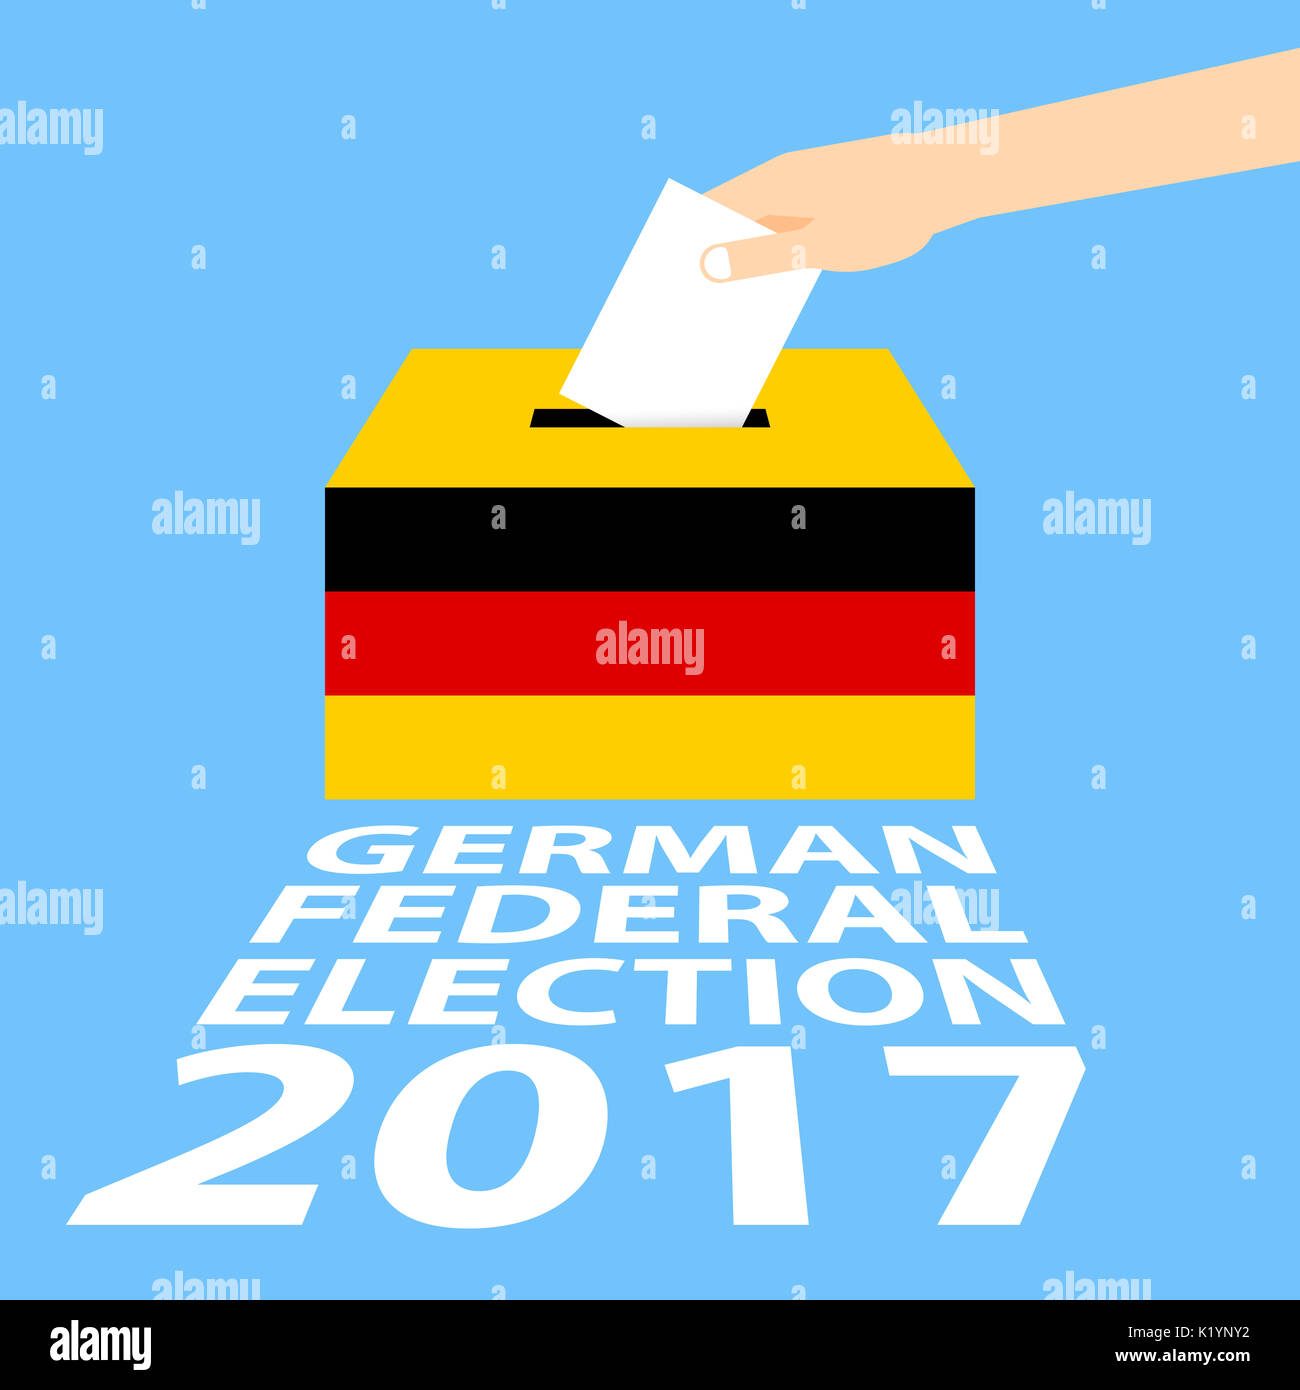 German Federal Election 2017 Vector Illustration Flat Style - Hand Putting Voting Paper in the Ballot Box Stock Photo